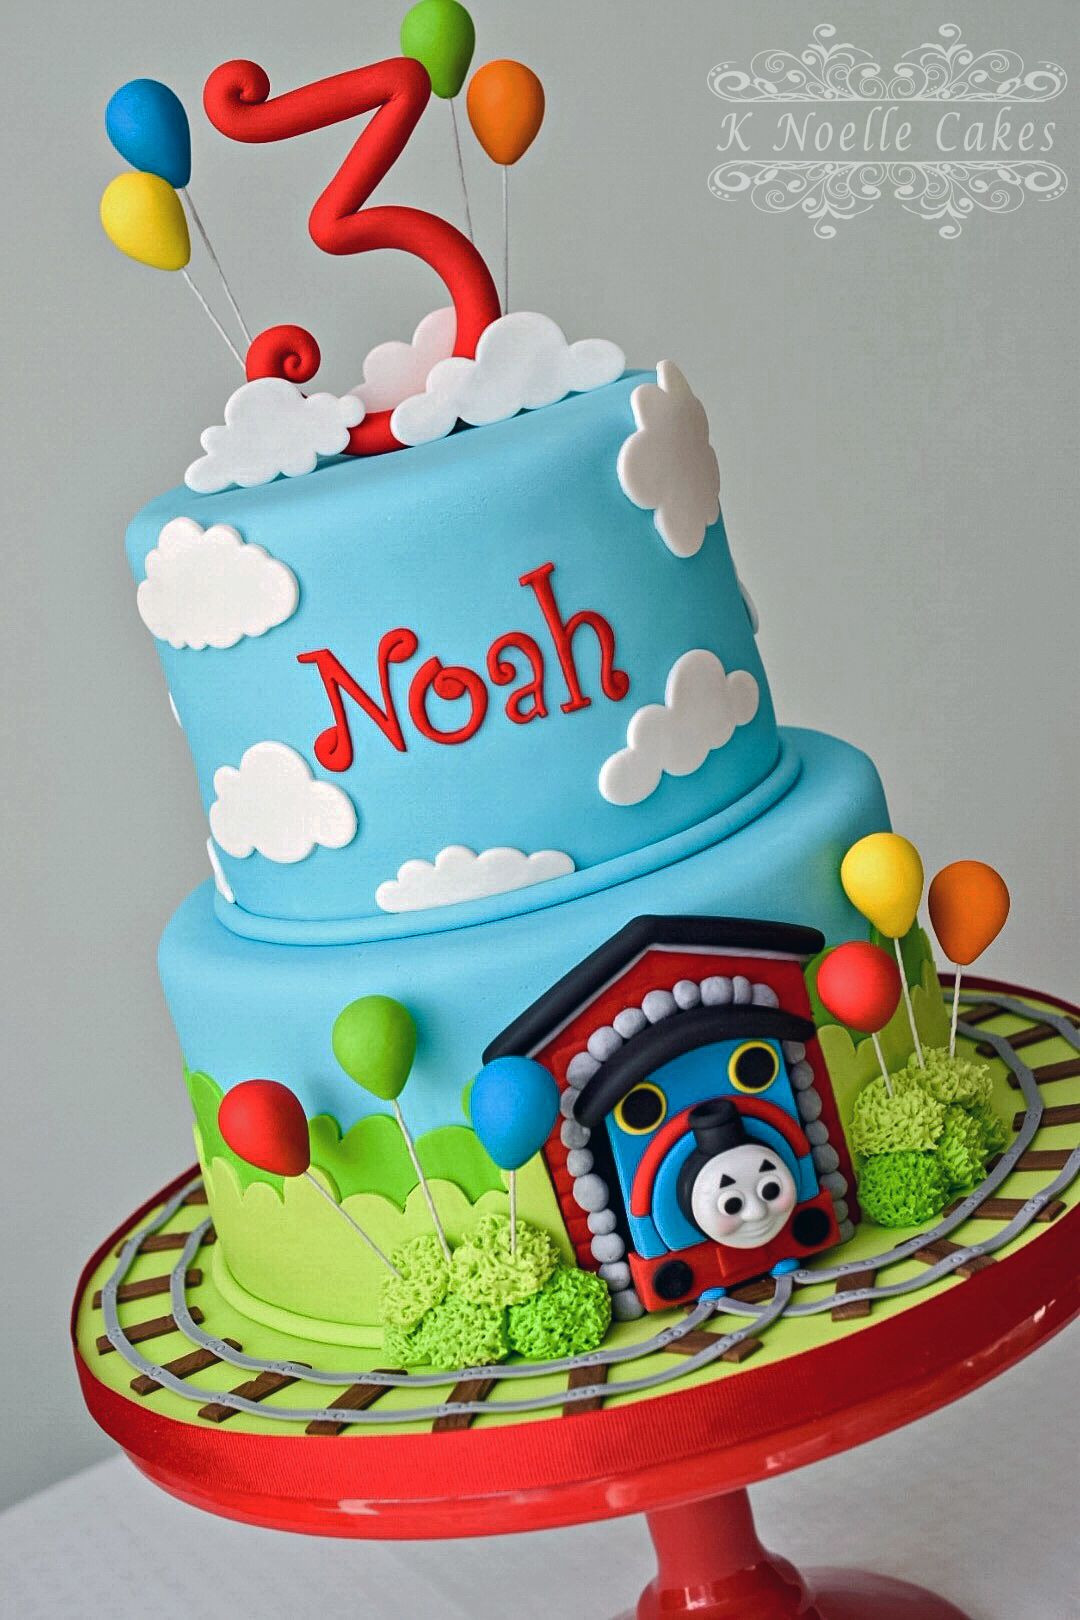 Thomas The Train Birthday Cakes
 Thomas the Train cake by K Noelle Cakes With images